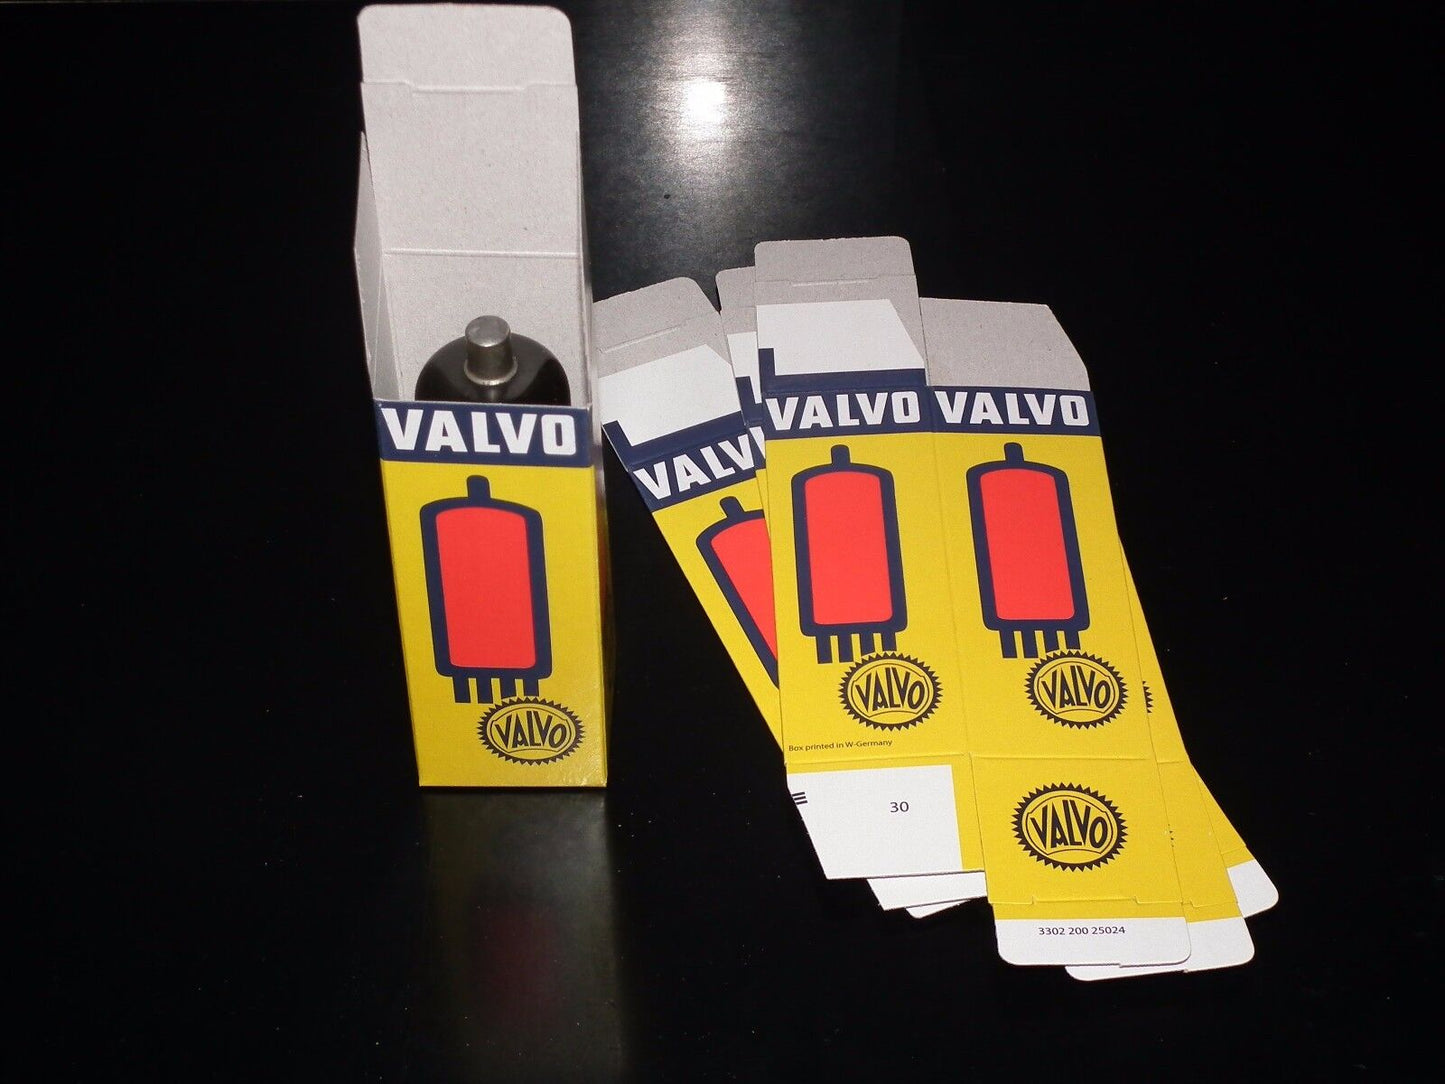 6 pcs Valvo Tube Boxes for Octal and Magnoval tubes EL34 GZ34 6CA7 6SN7 5AR4